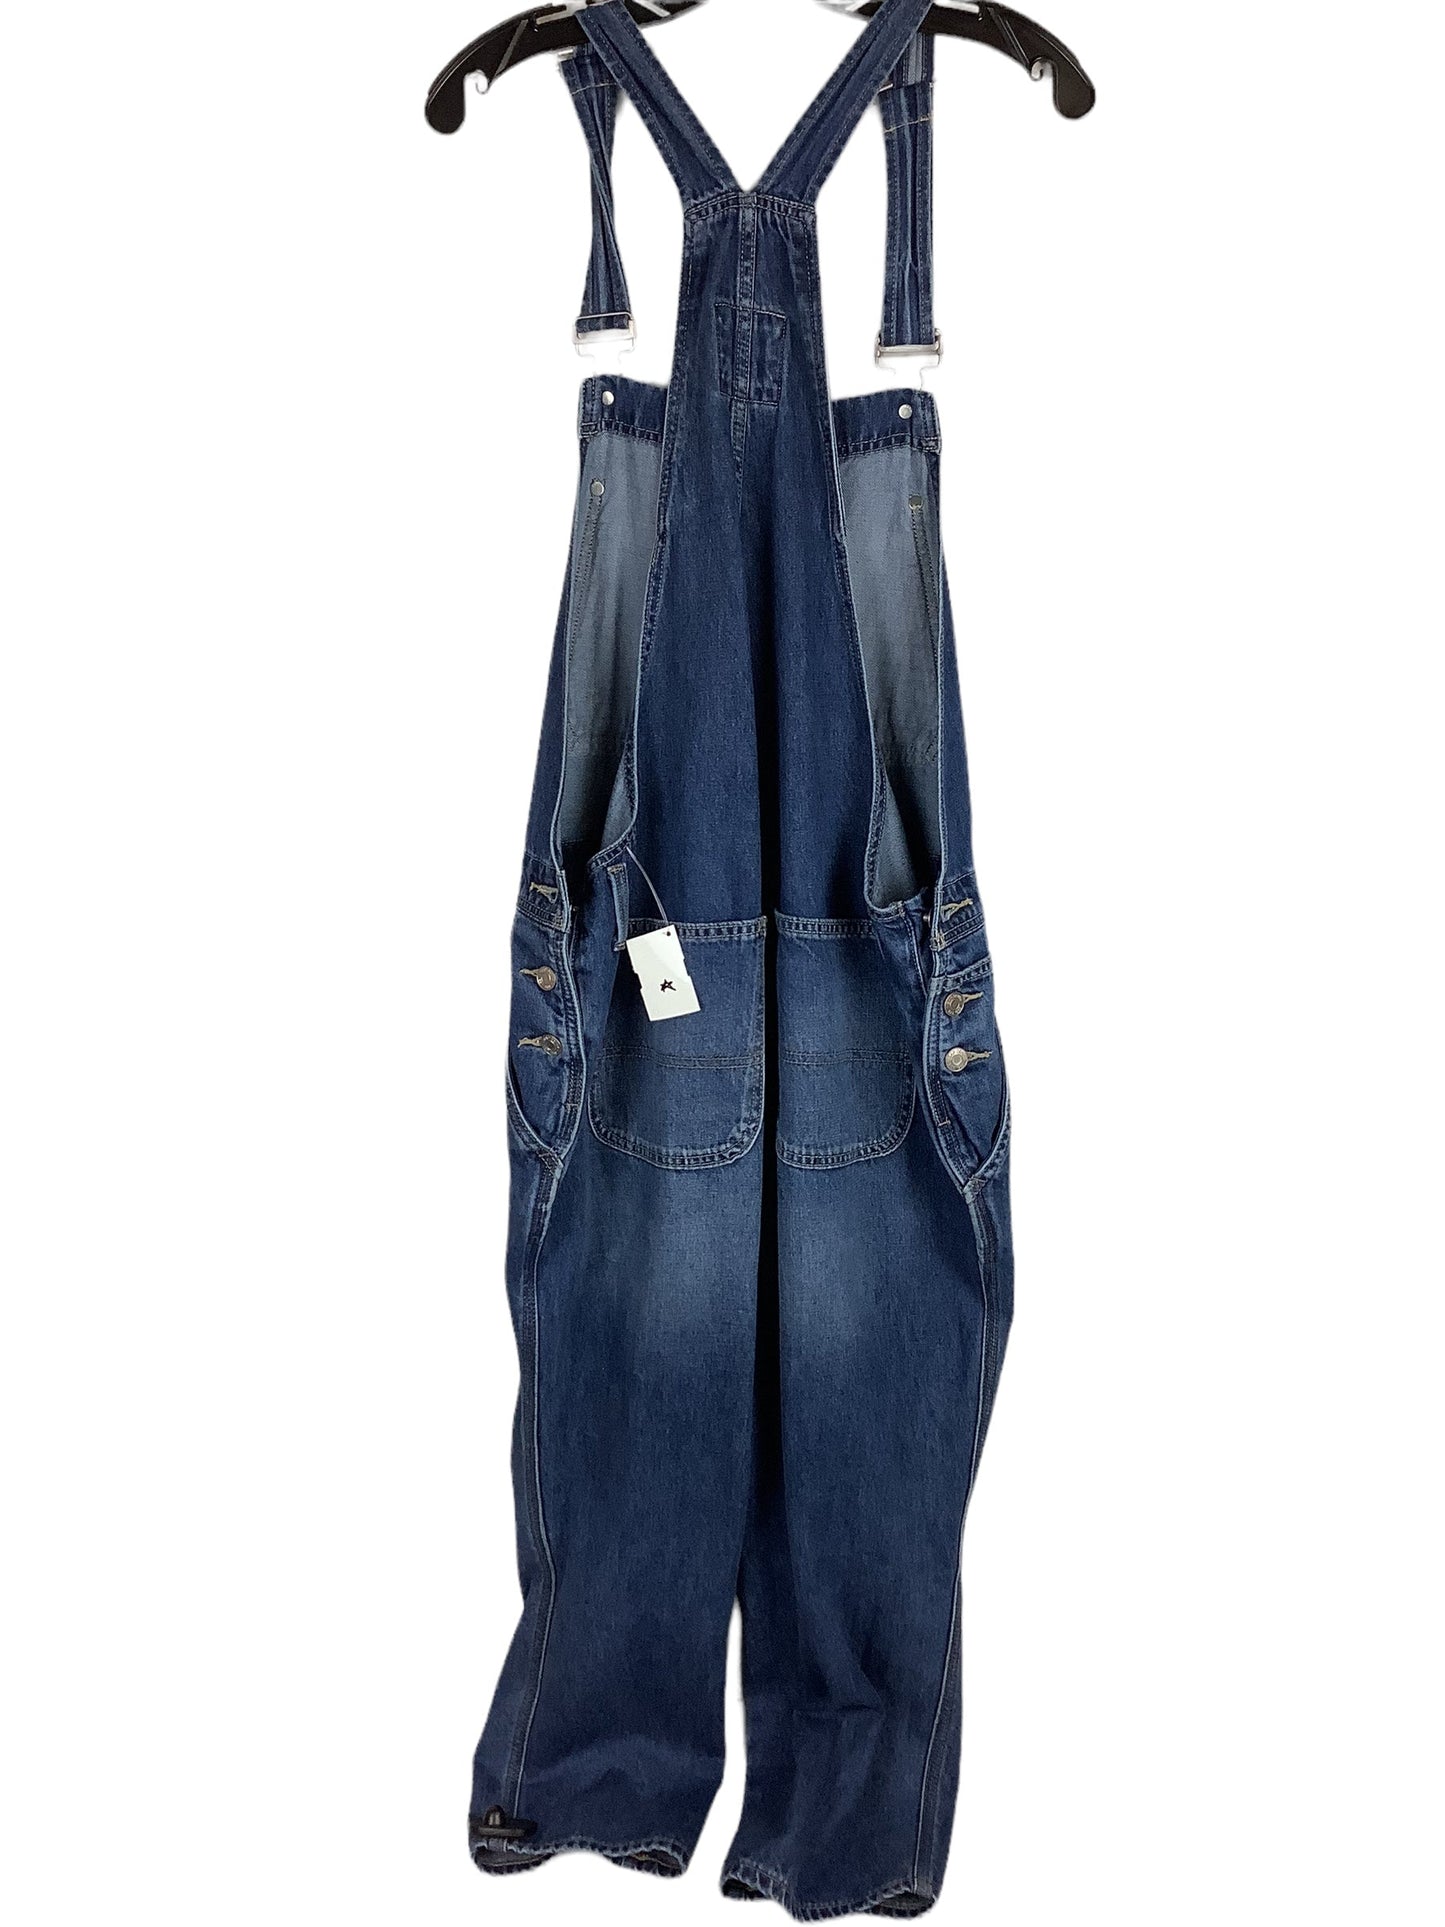 Overalls By Gap  Size: petite L